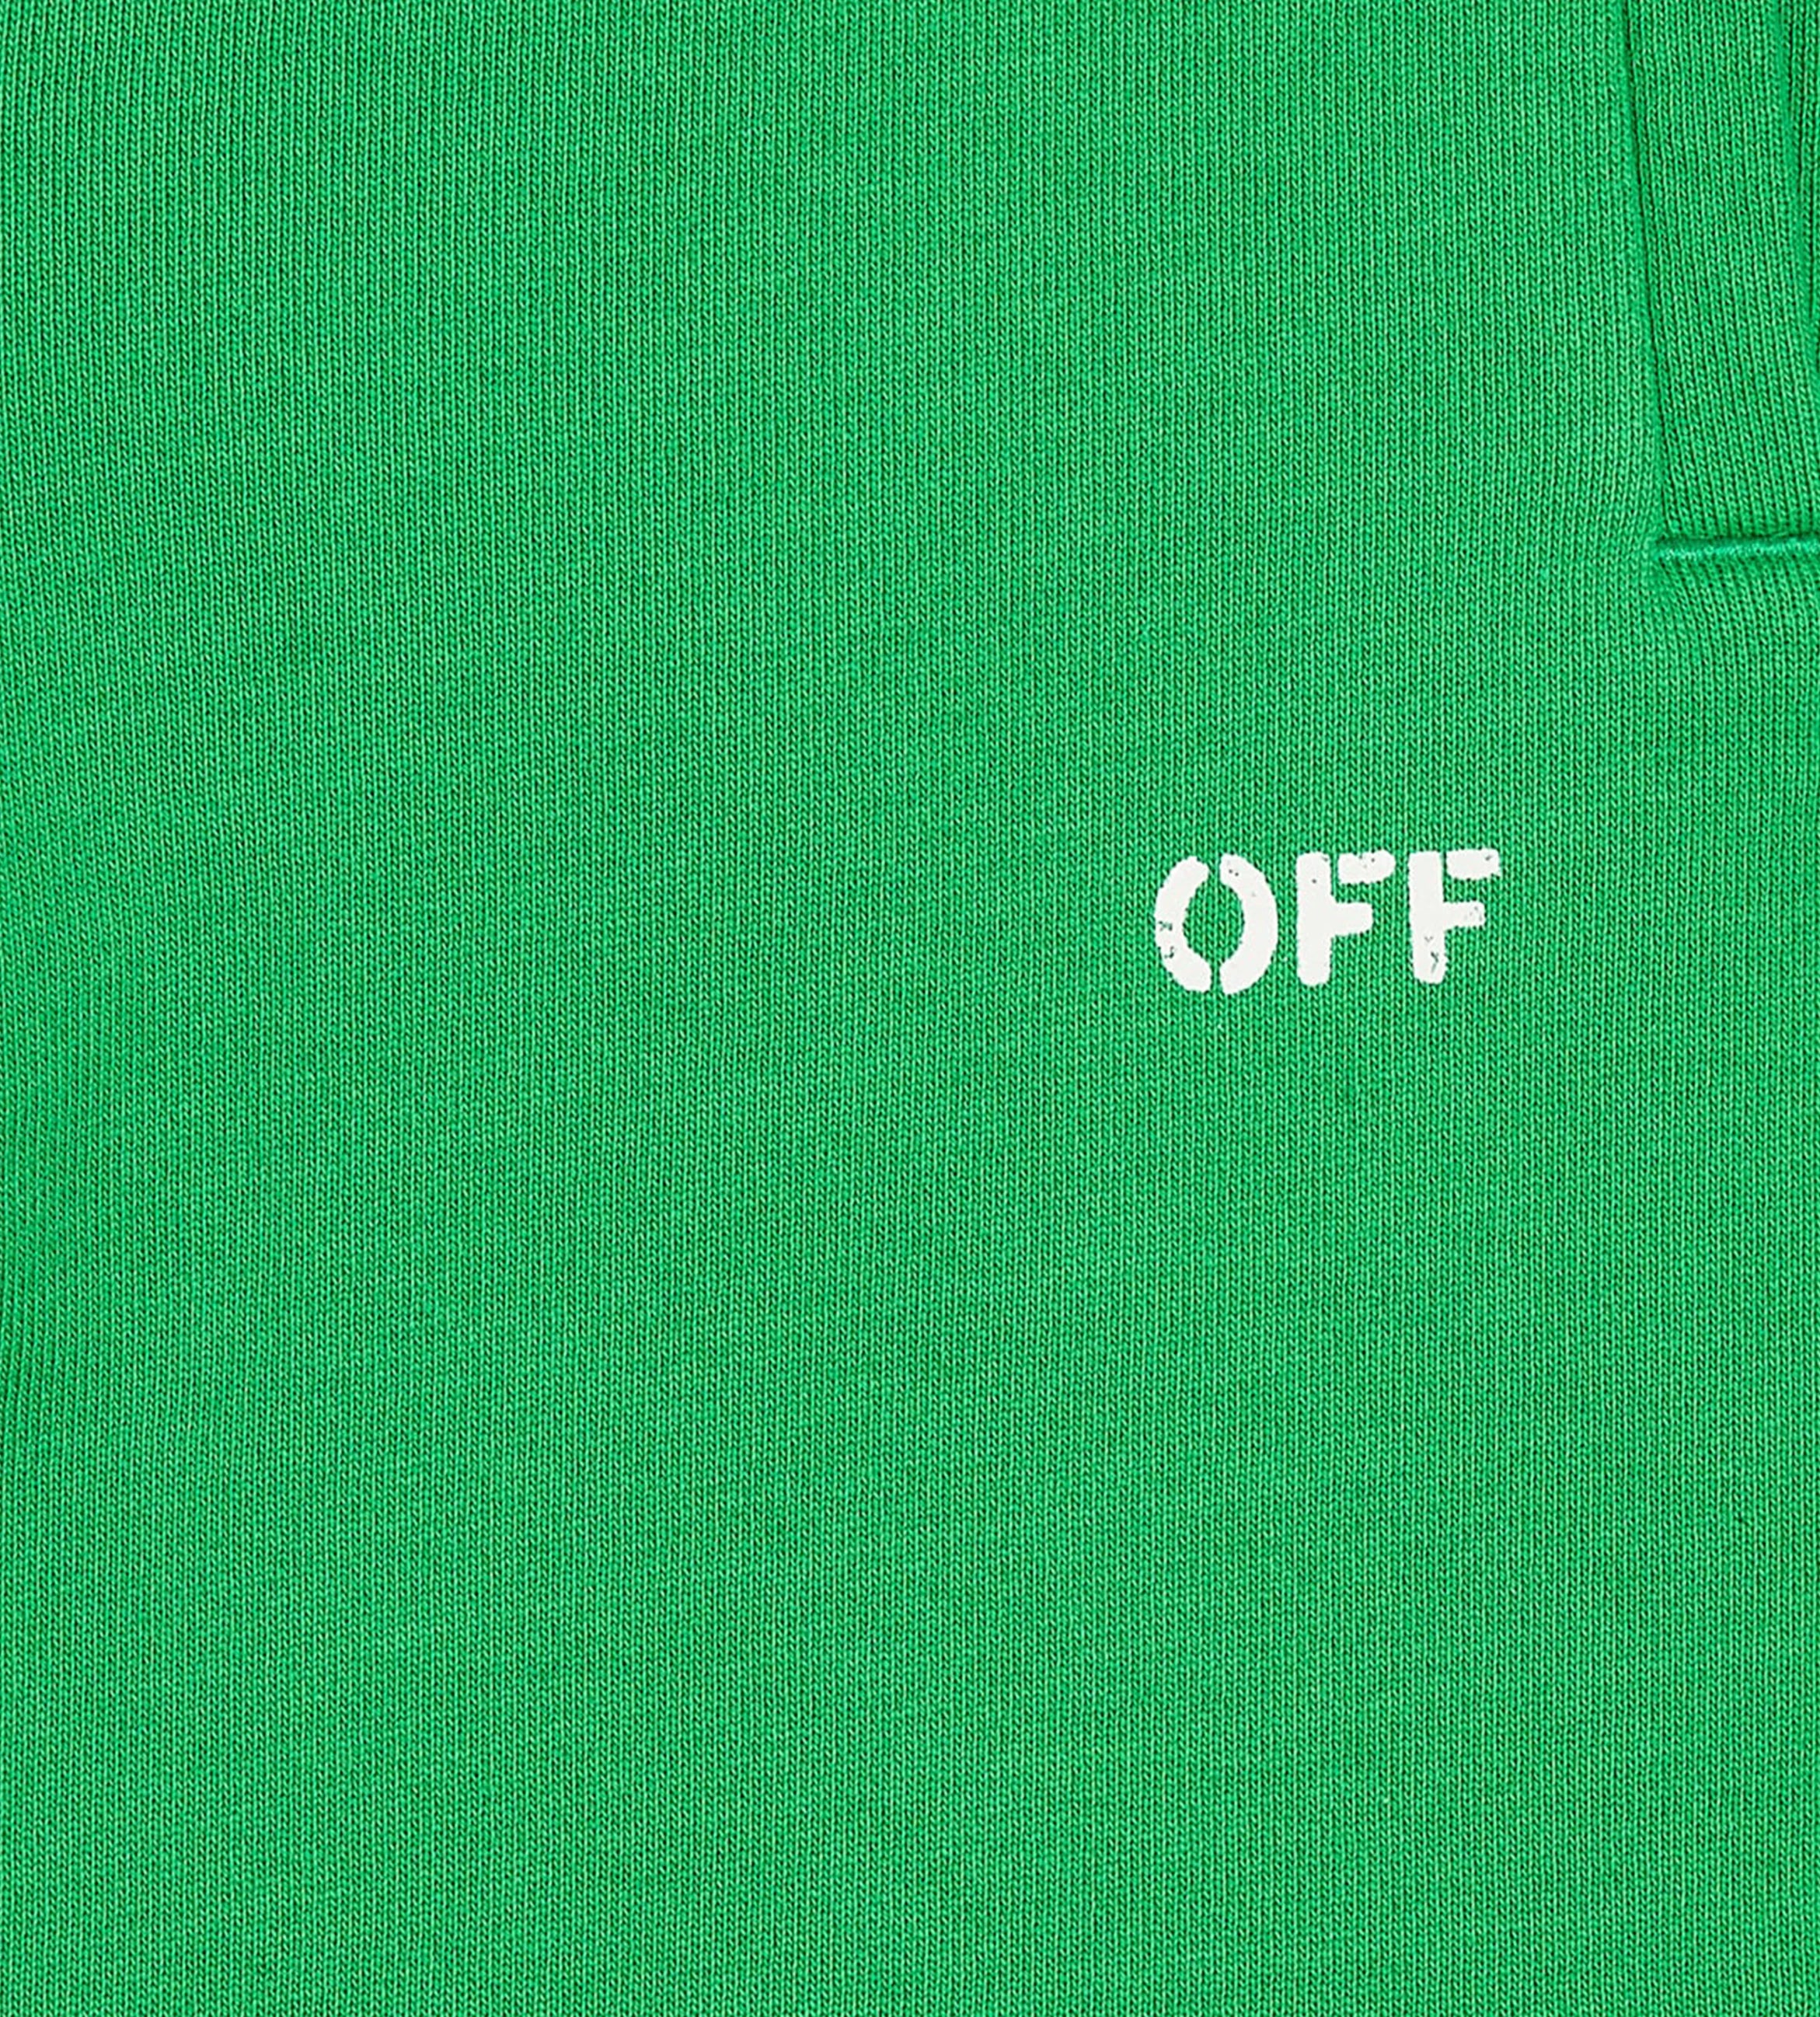 Off Stamp Plain Shorts Green